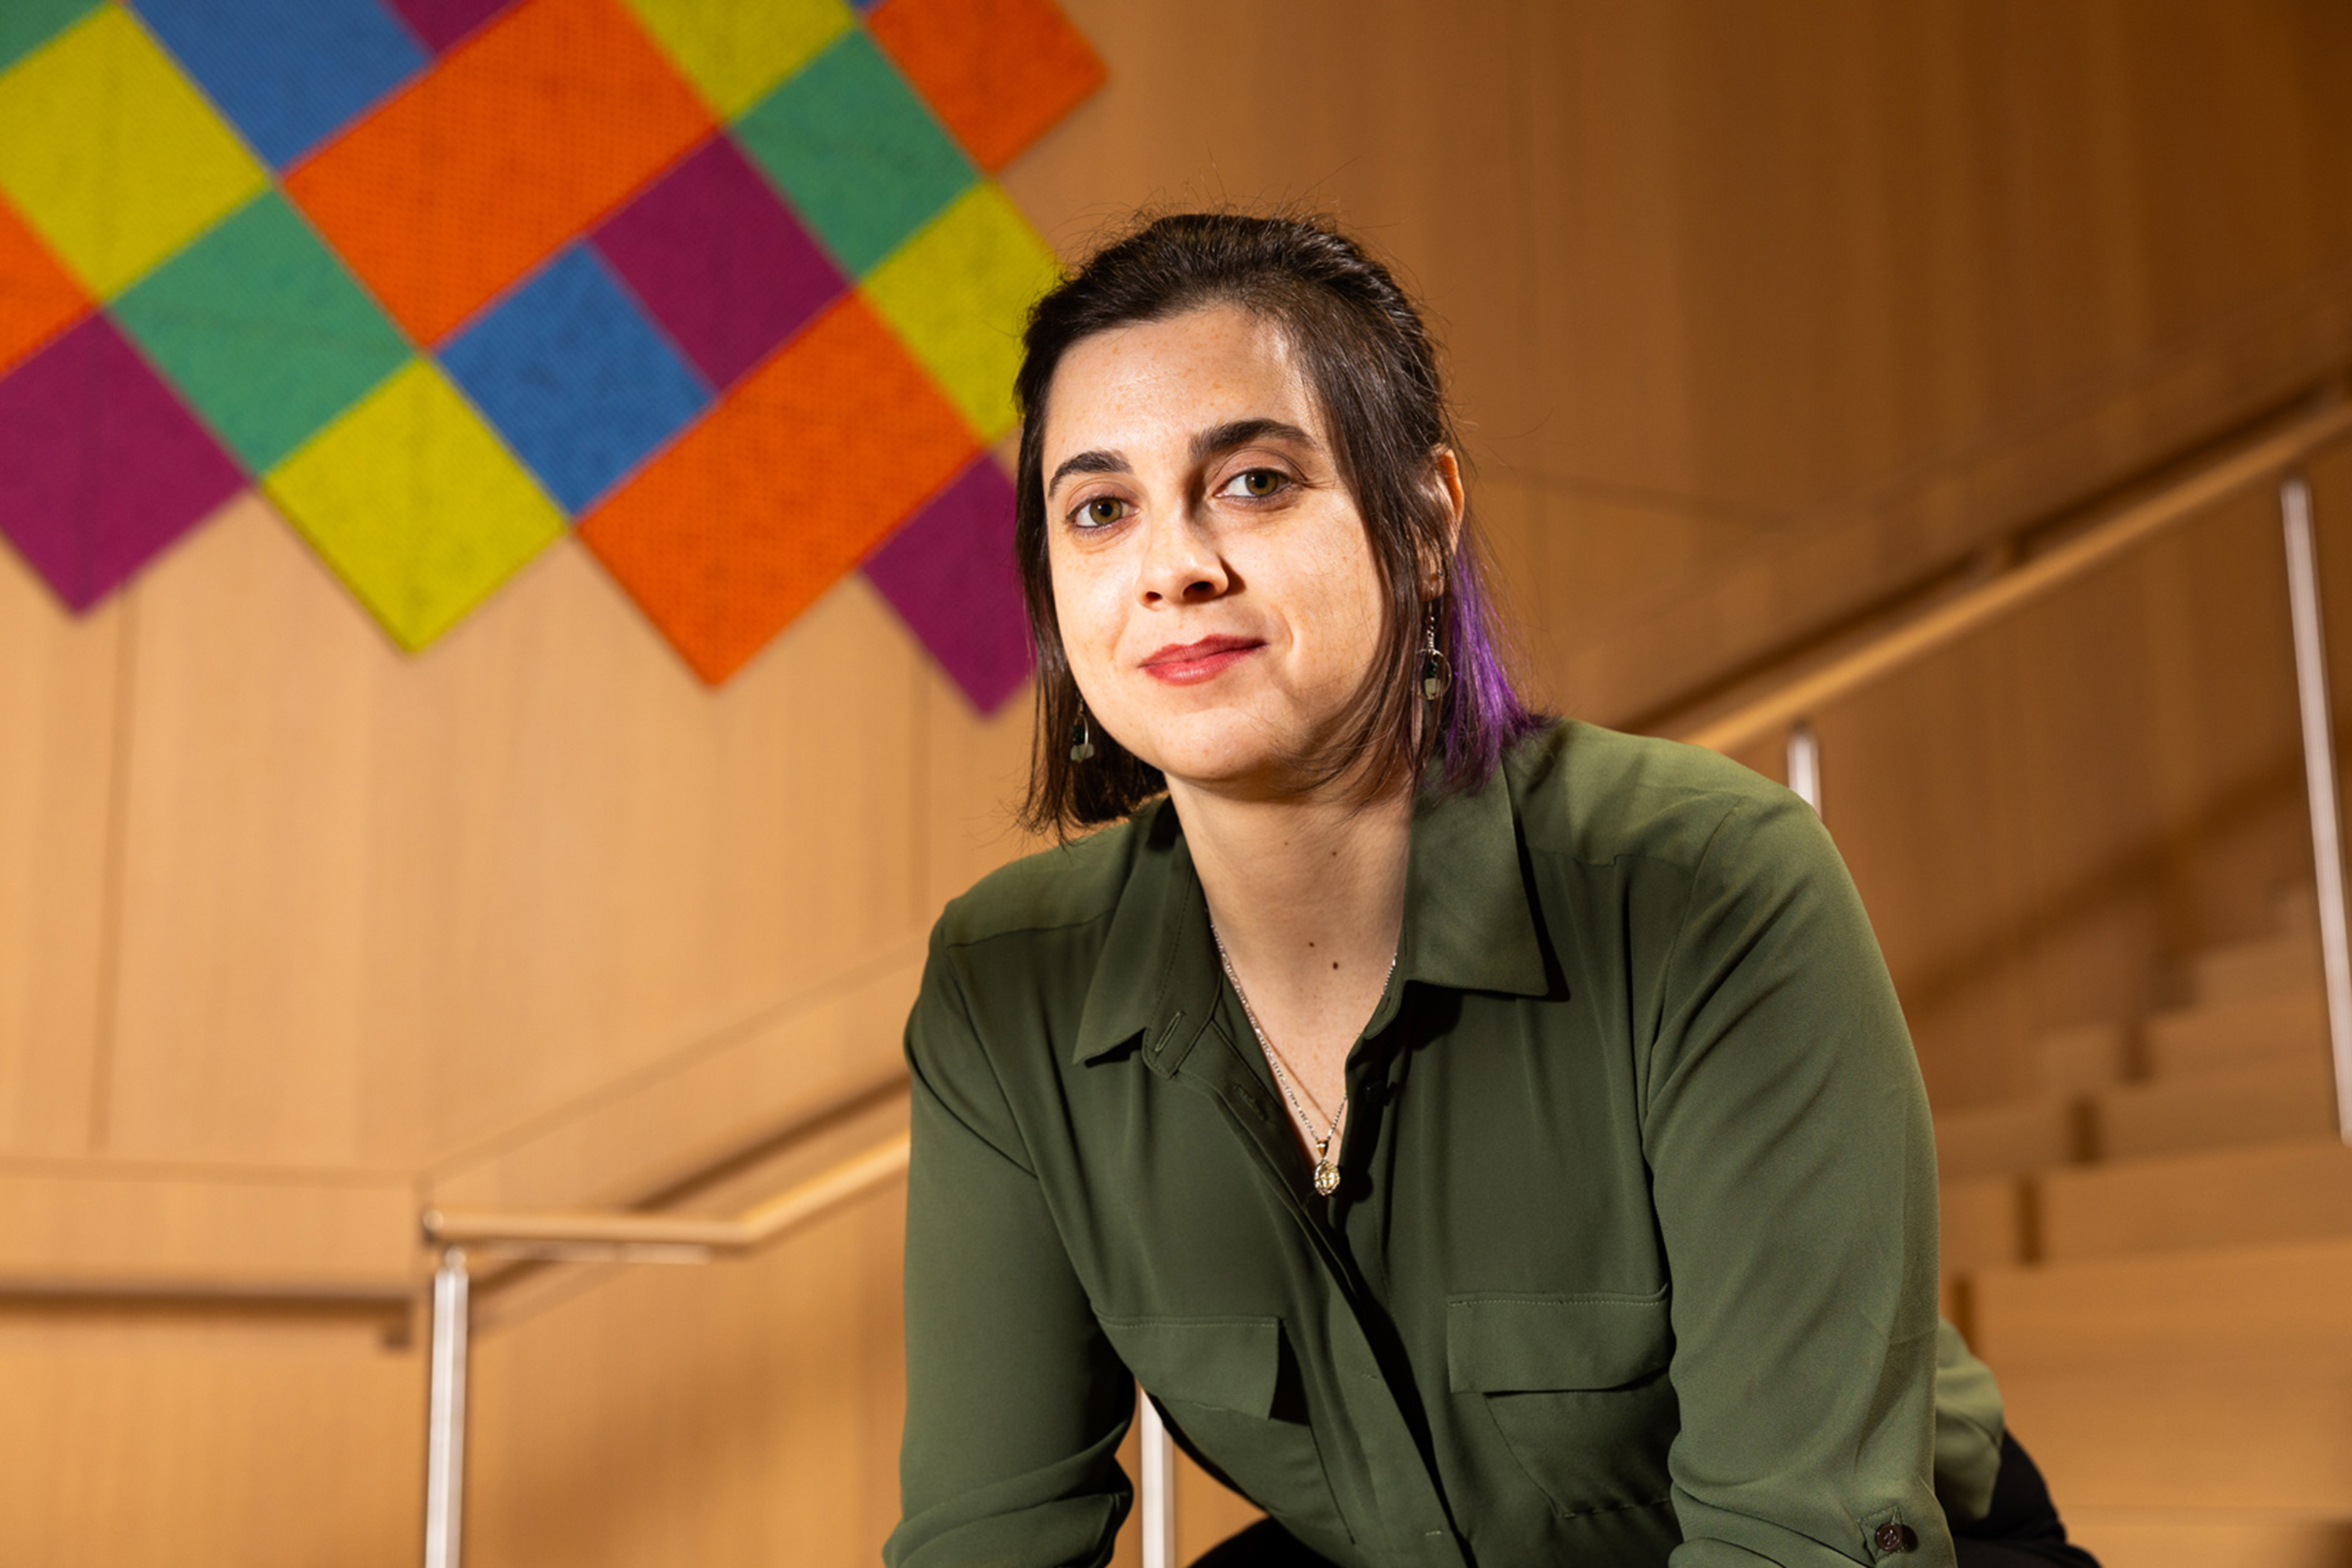 Portrait of Michelle Spektor PhD ’23 from waist up. A stairway railing is visible behind her as is a wooden wall with artwork made of blocks of color.